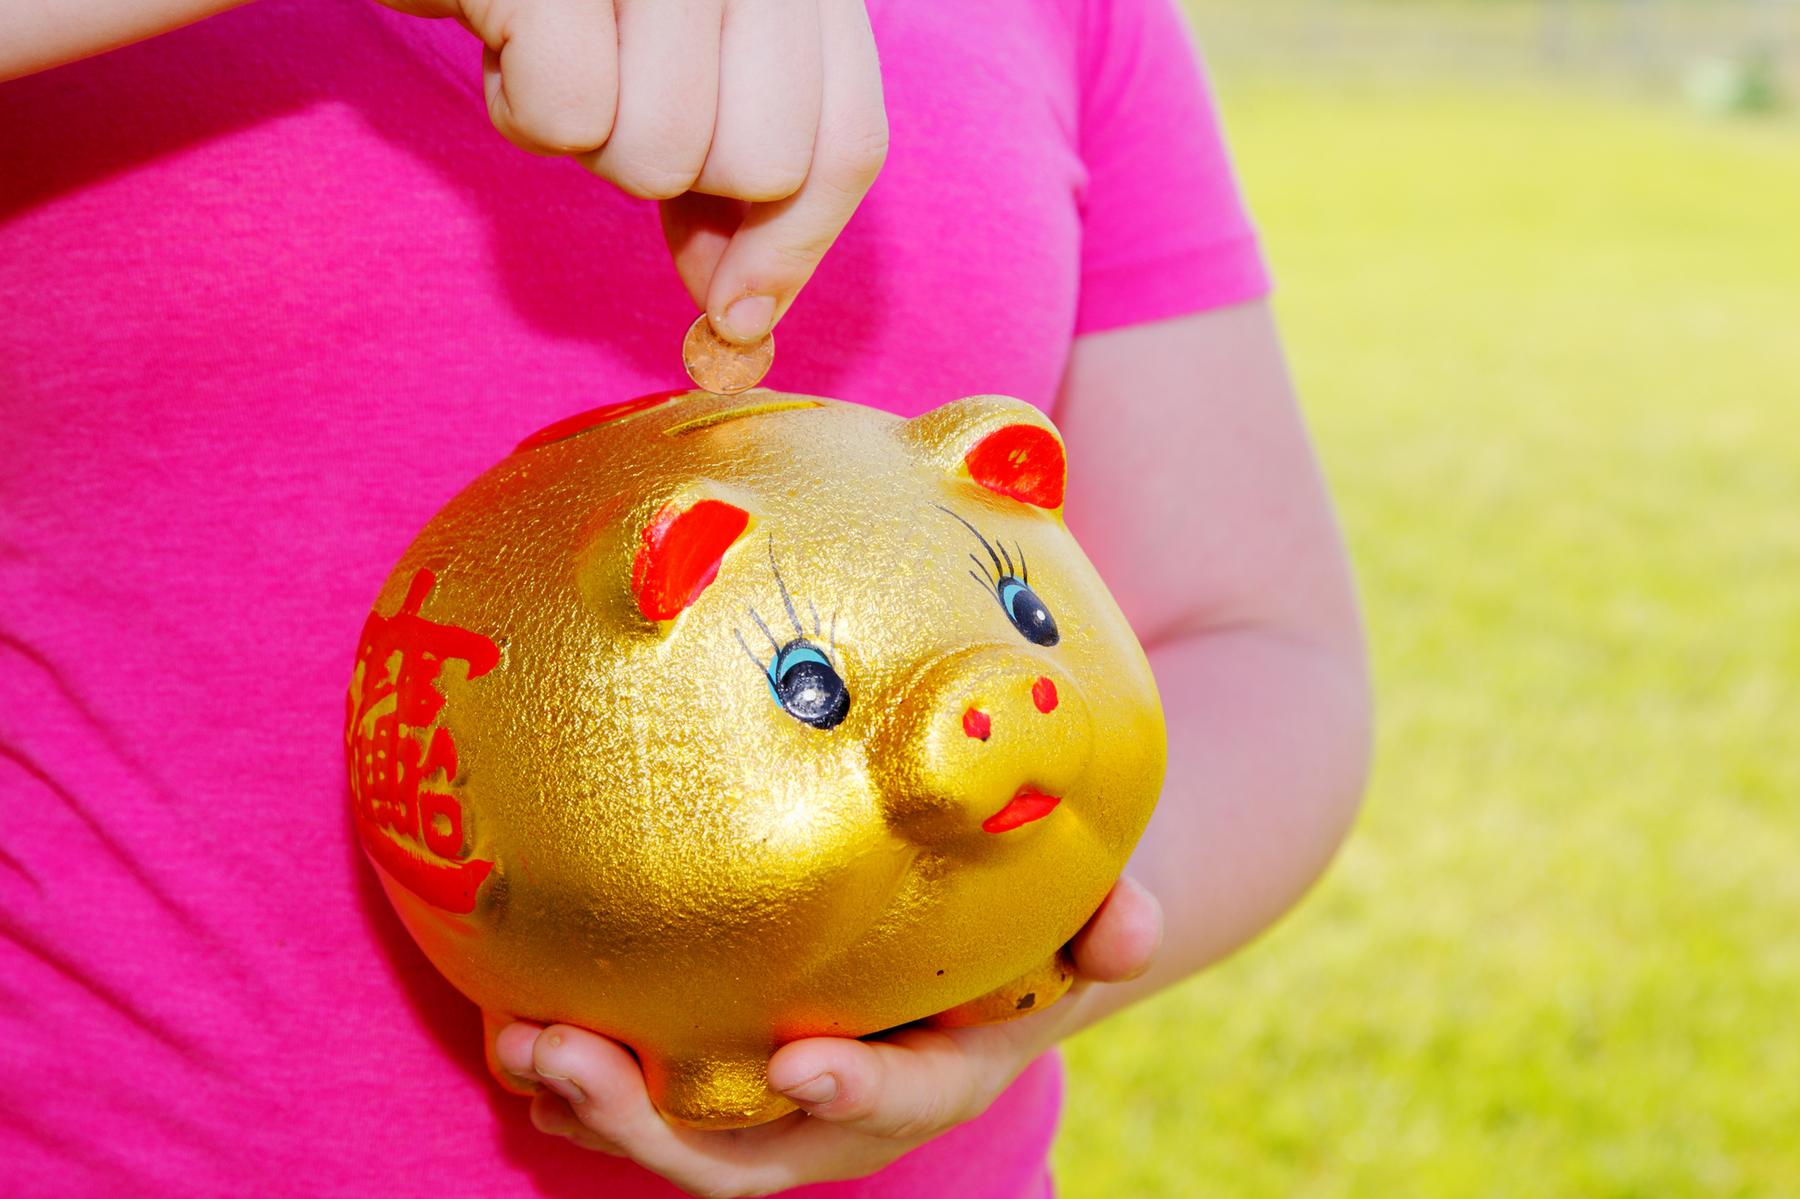 File:Girl Purring Money Into Piggy Bank.jpg - a little girl holding a gold pig toy